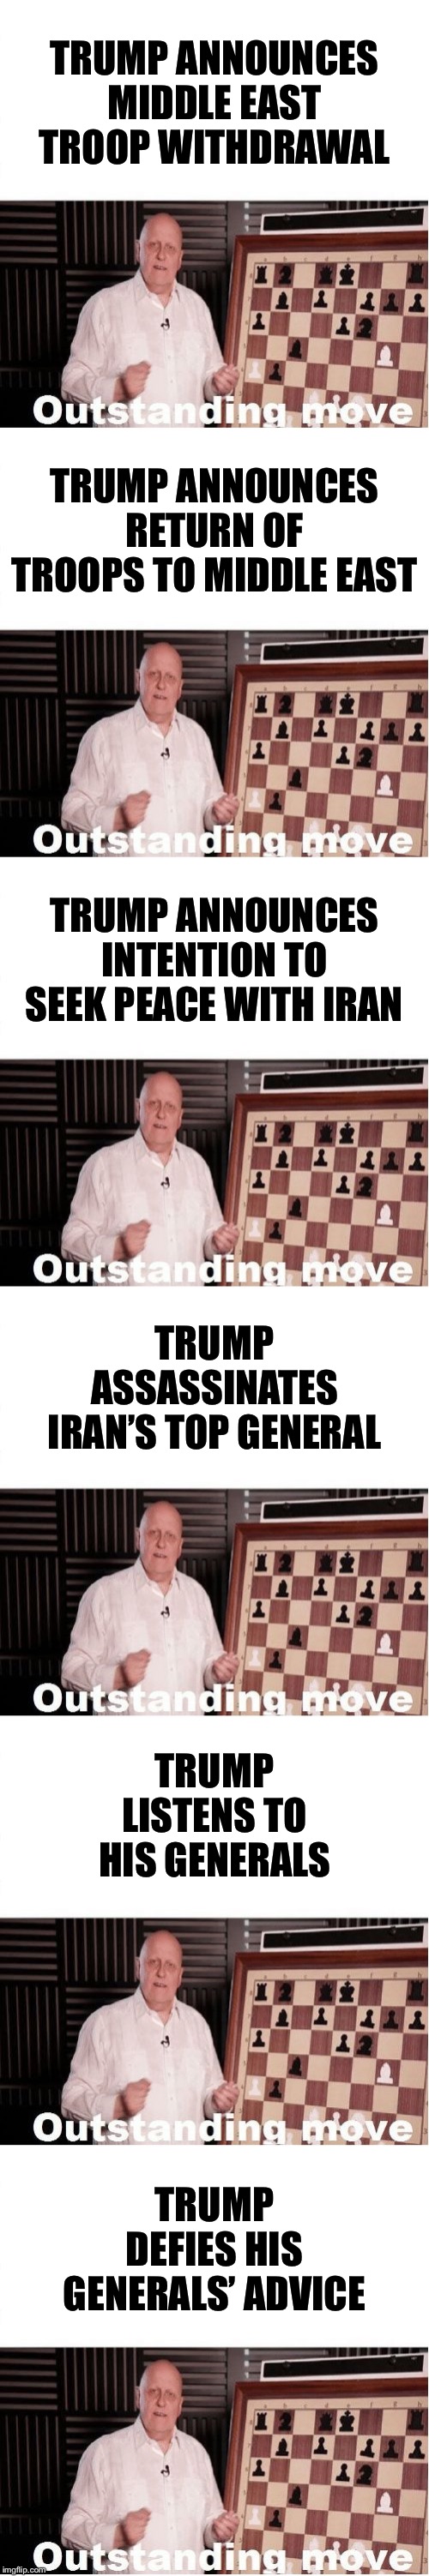 Orange man good | TRUMP ANNOUNCES MIDDLE EAST TROOP WITHDRAWAL; TRUMP ANNOUNCES RETURN OF TROOPS TO MIDDLE EAST; TRUMP ANNOUNCES INTENTION TO SEEK PEACE WITH IRAN; TRUMP ASSASSINATES IRAN’S TOP GENERAL; TRUMP LISTENS TO HIS GENERALS; TRUMP DEFIES HIS GENERALS’ ADVICE | image tagged in outstanding move,orange trump,donald trump,trump,middle east,right wing | made w/ Imgflip meme maker